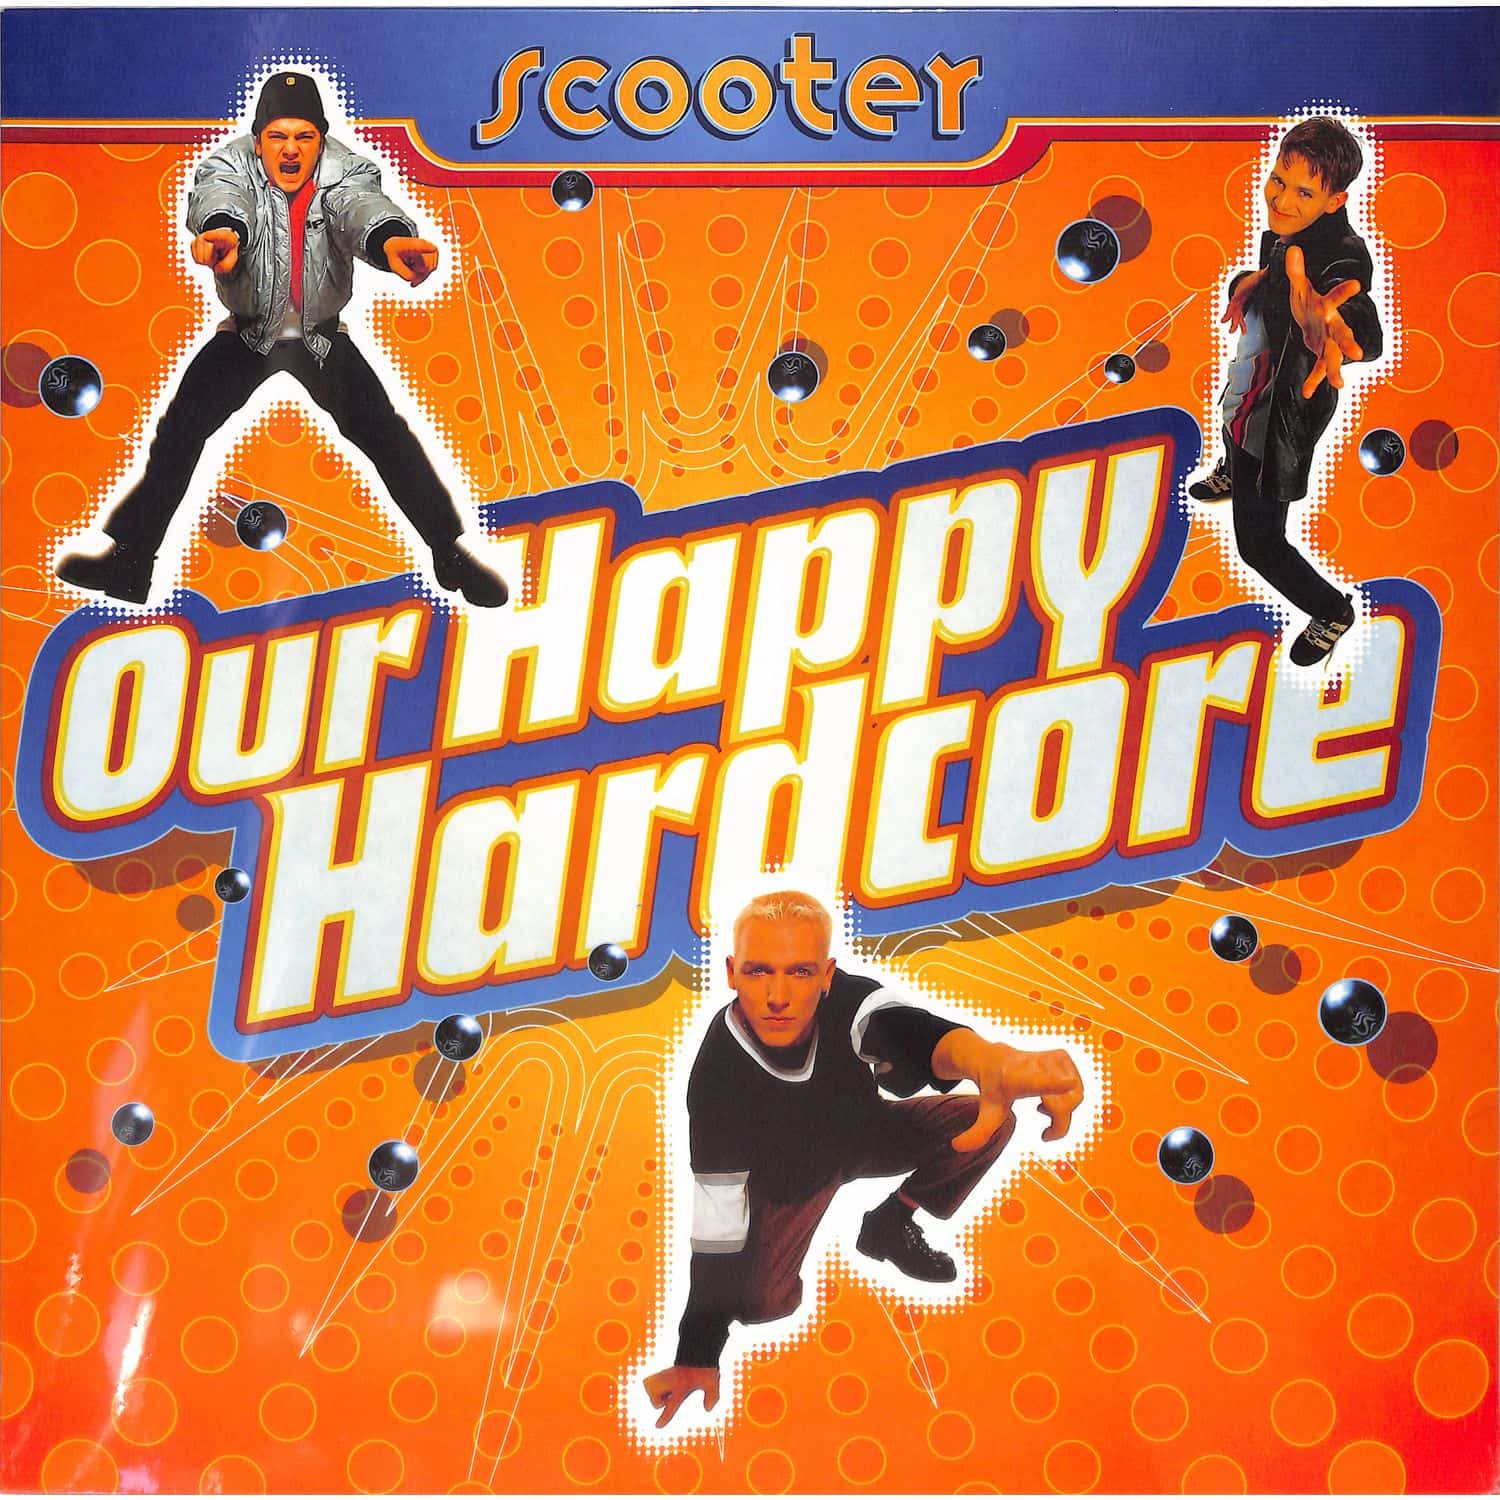 Scooter - OUR HAPPY HARDCORE 